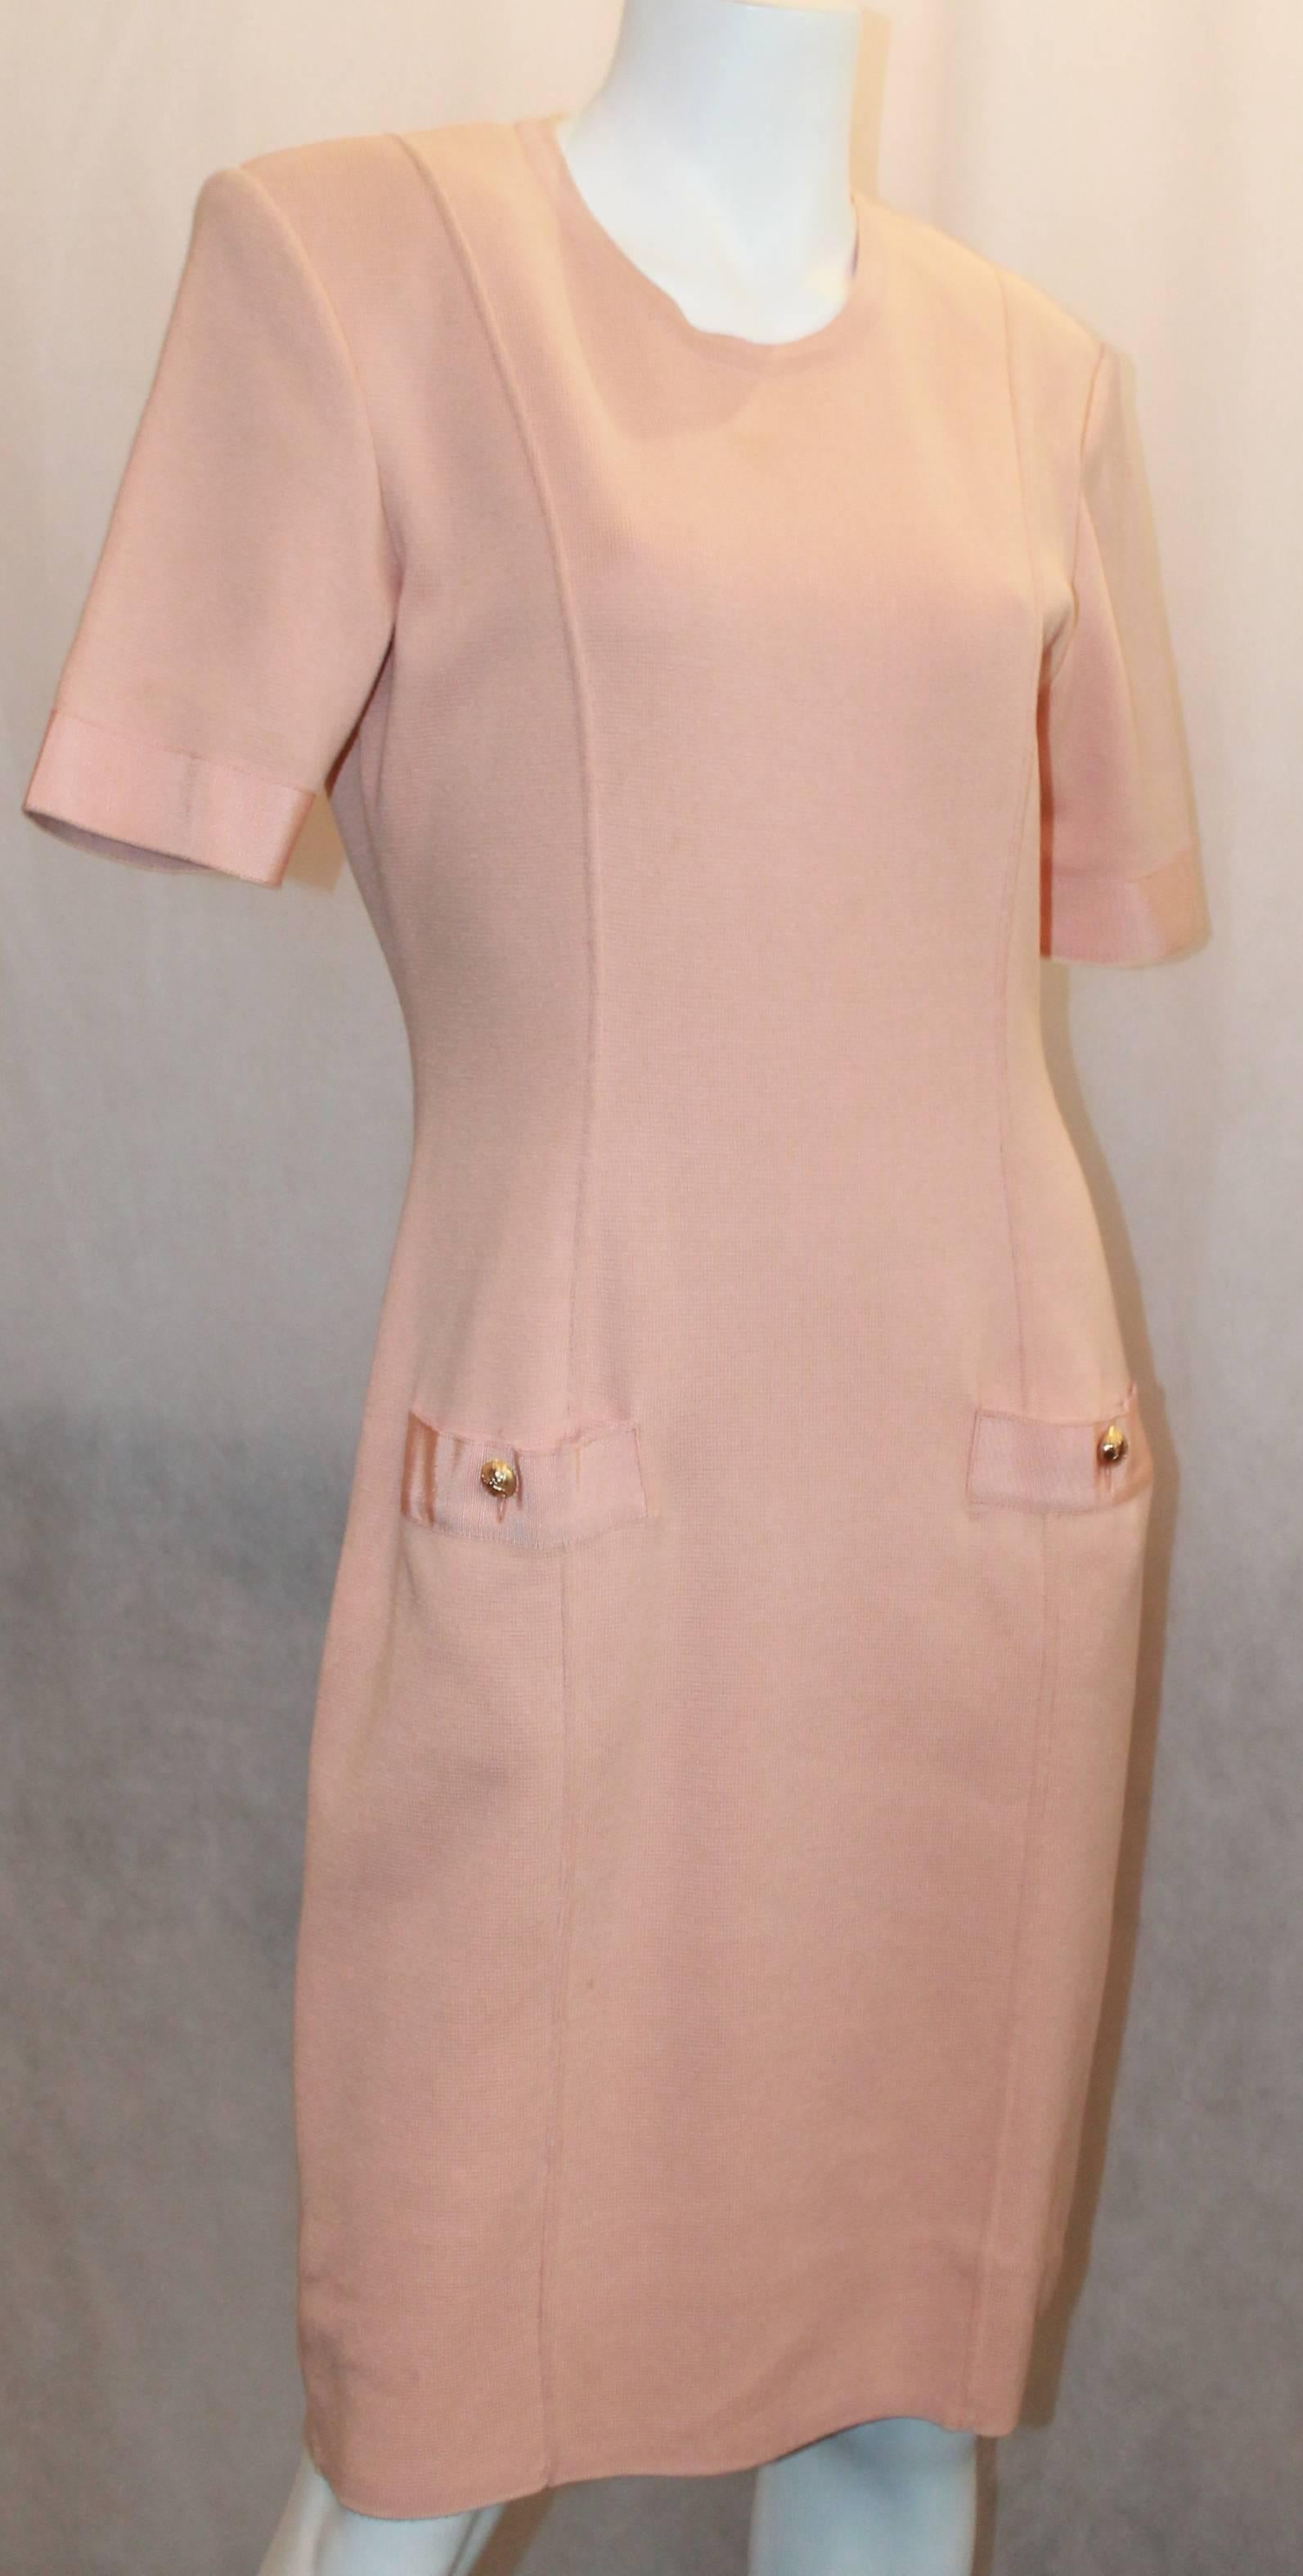 Salvatore Ferragamo Peach Cotton Knit Short Sleeve Shift Dress - Medium.  This lovely dress is in excellent condition.  It features a feminine peach cotton knit material, two pockets on the hips in the front with goldtone Ferragamo shoe buttons,